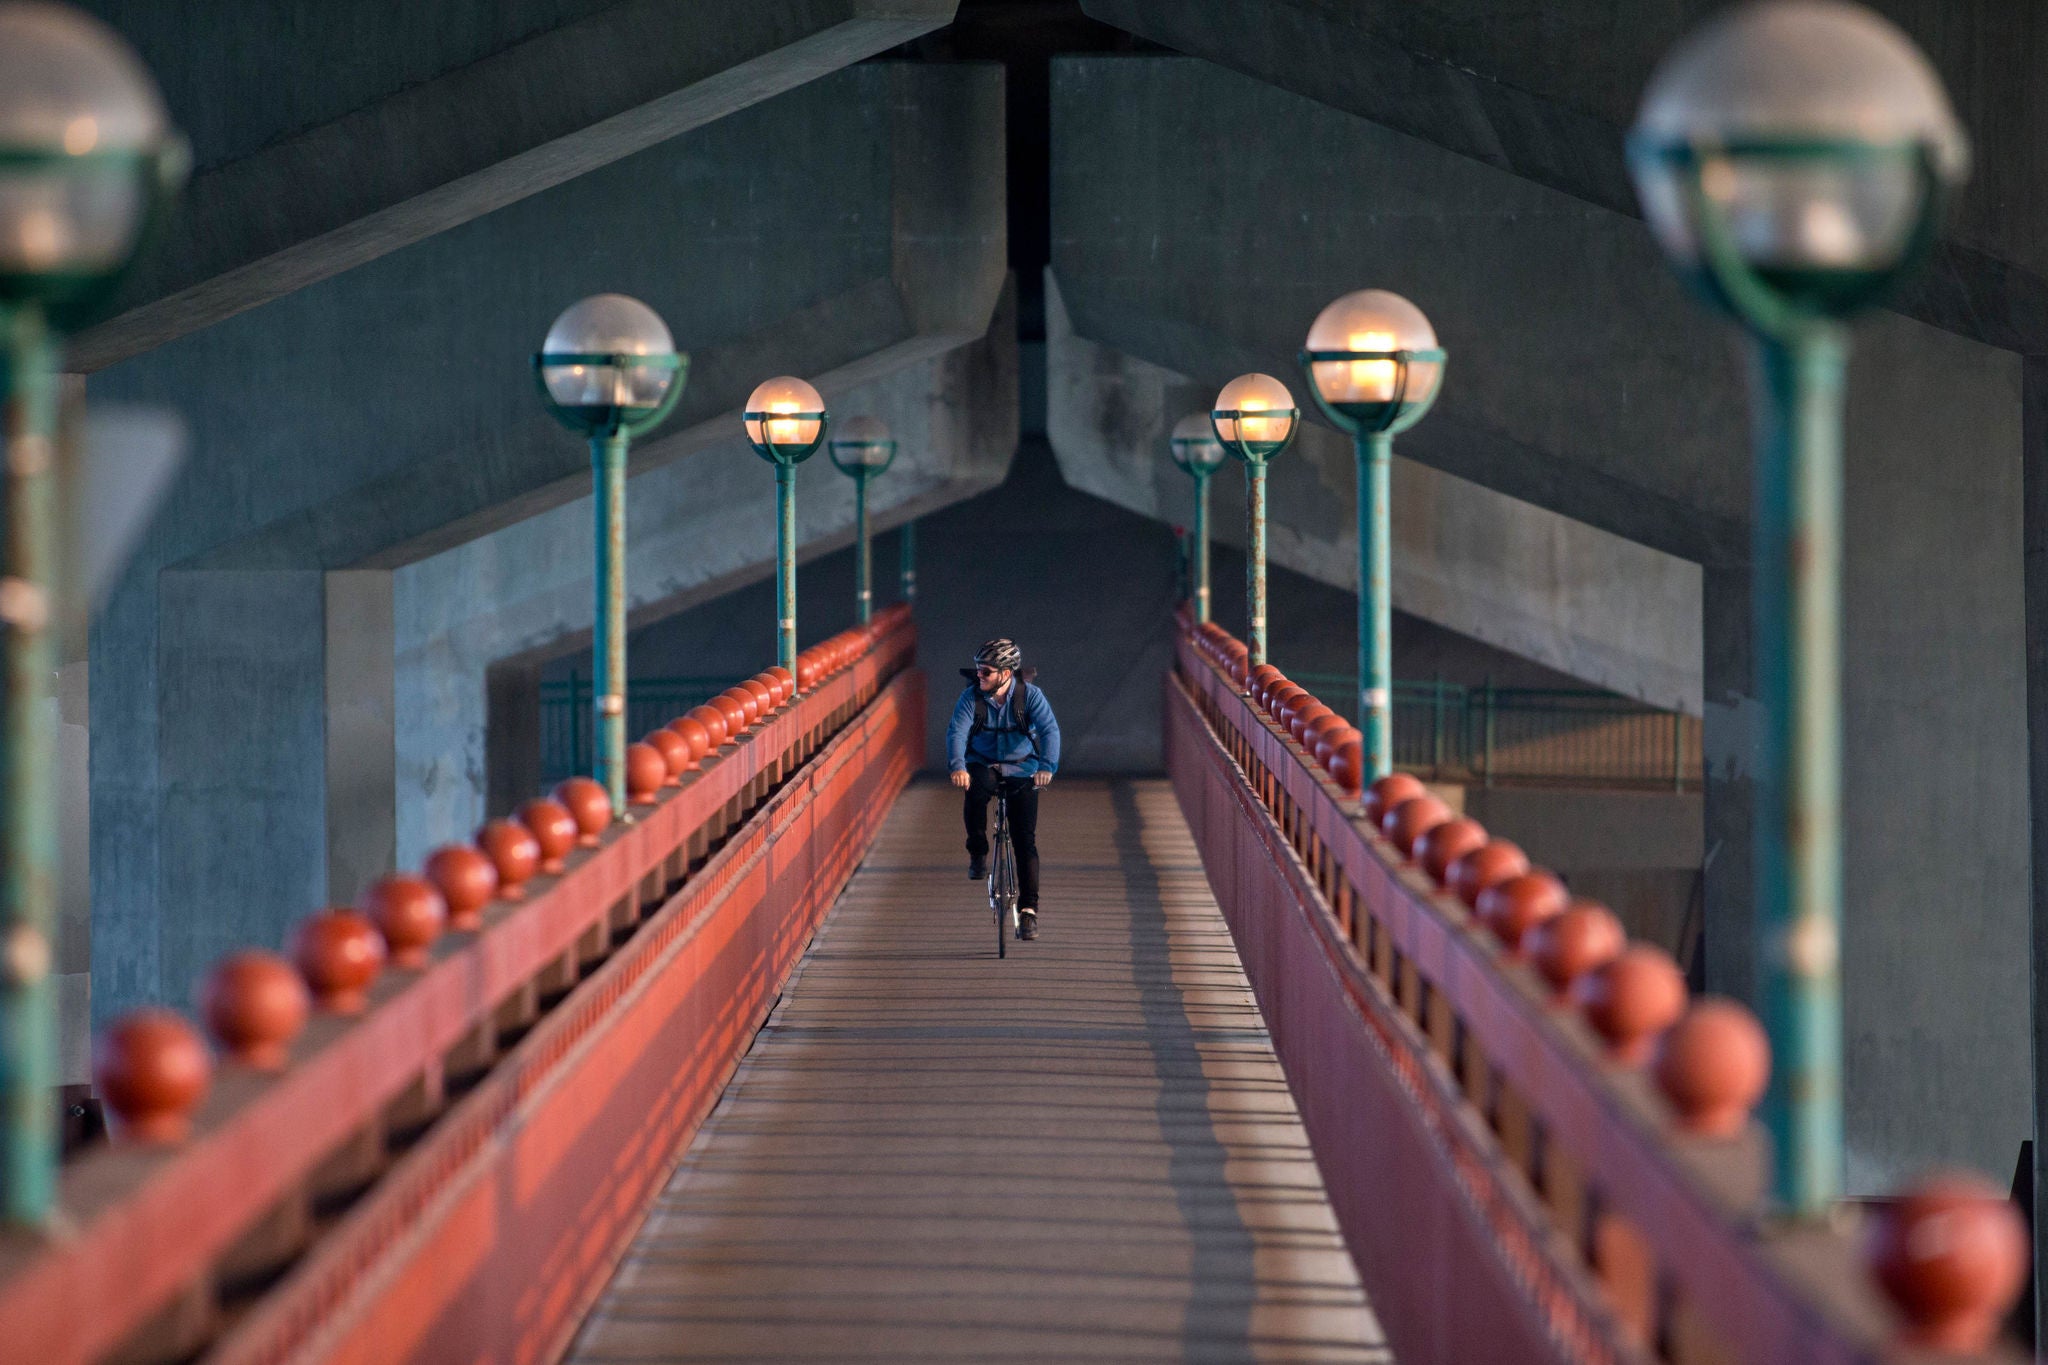 A male bike messenger rides over a bridge on his way to make a delivery. He is riding a fixed gear or one speed bicycle.